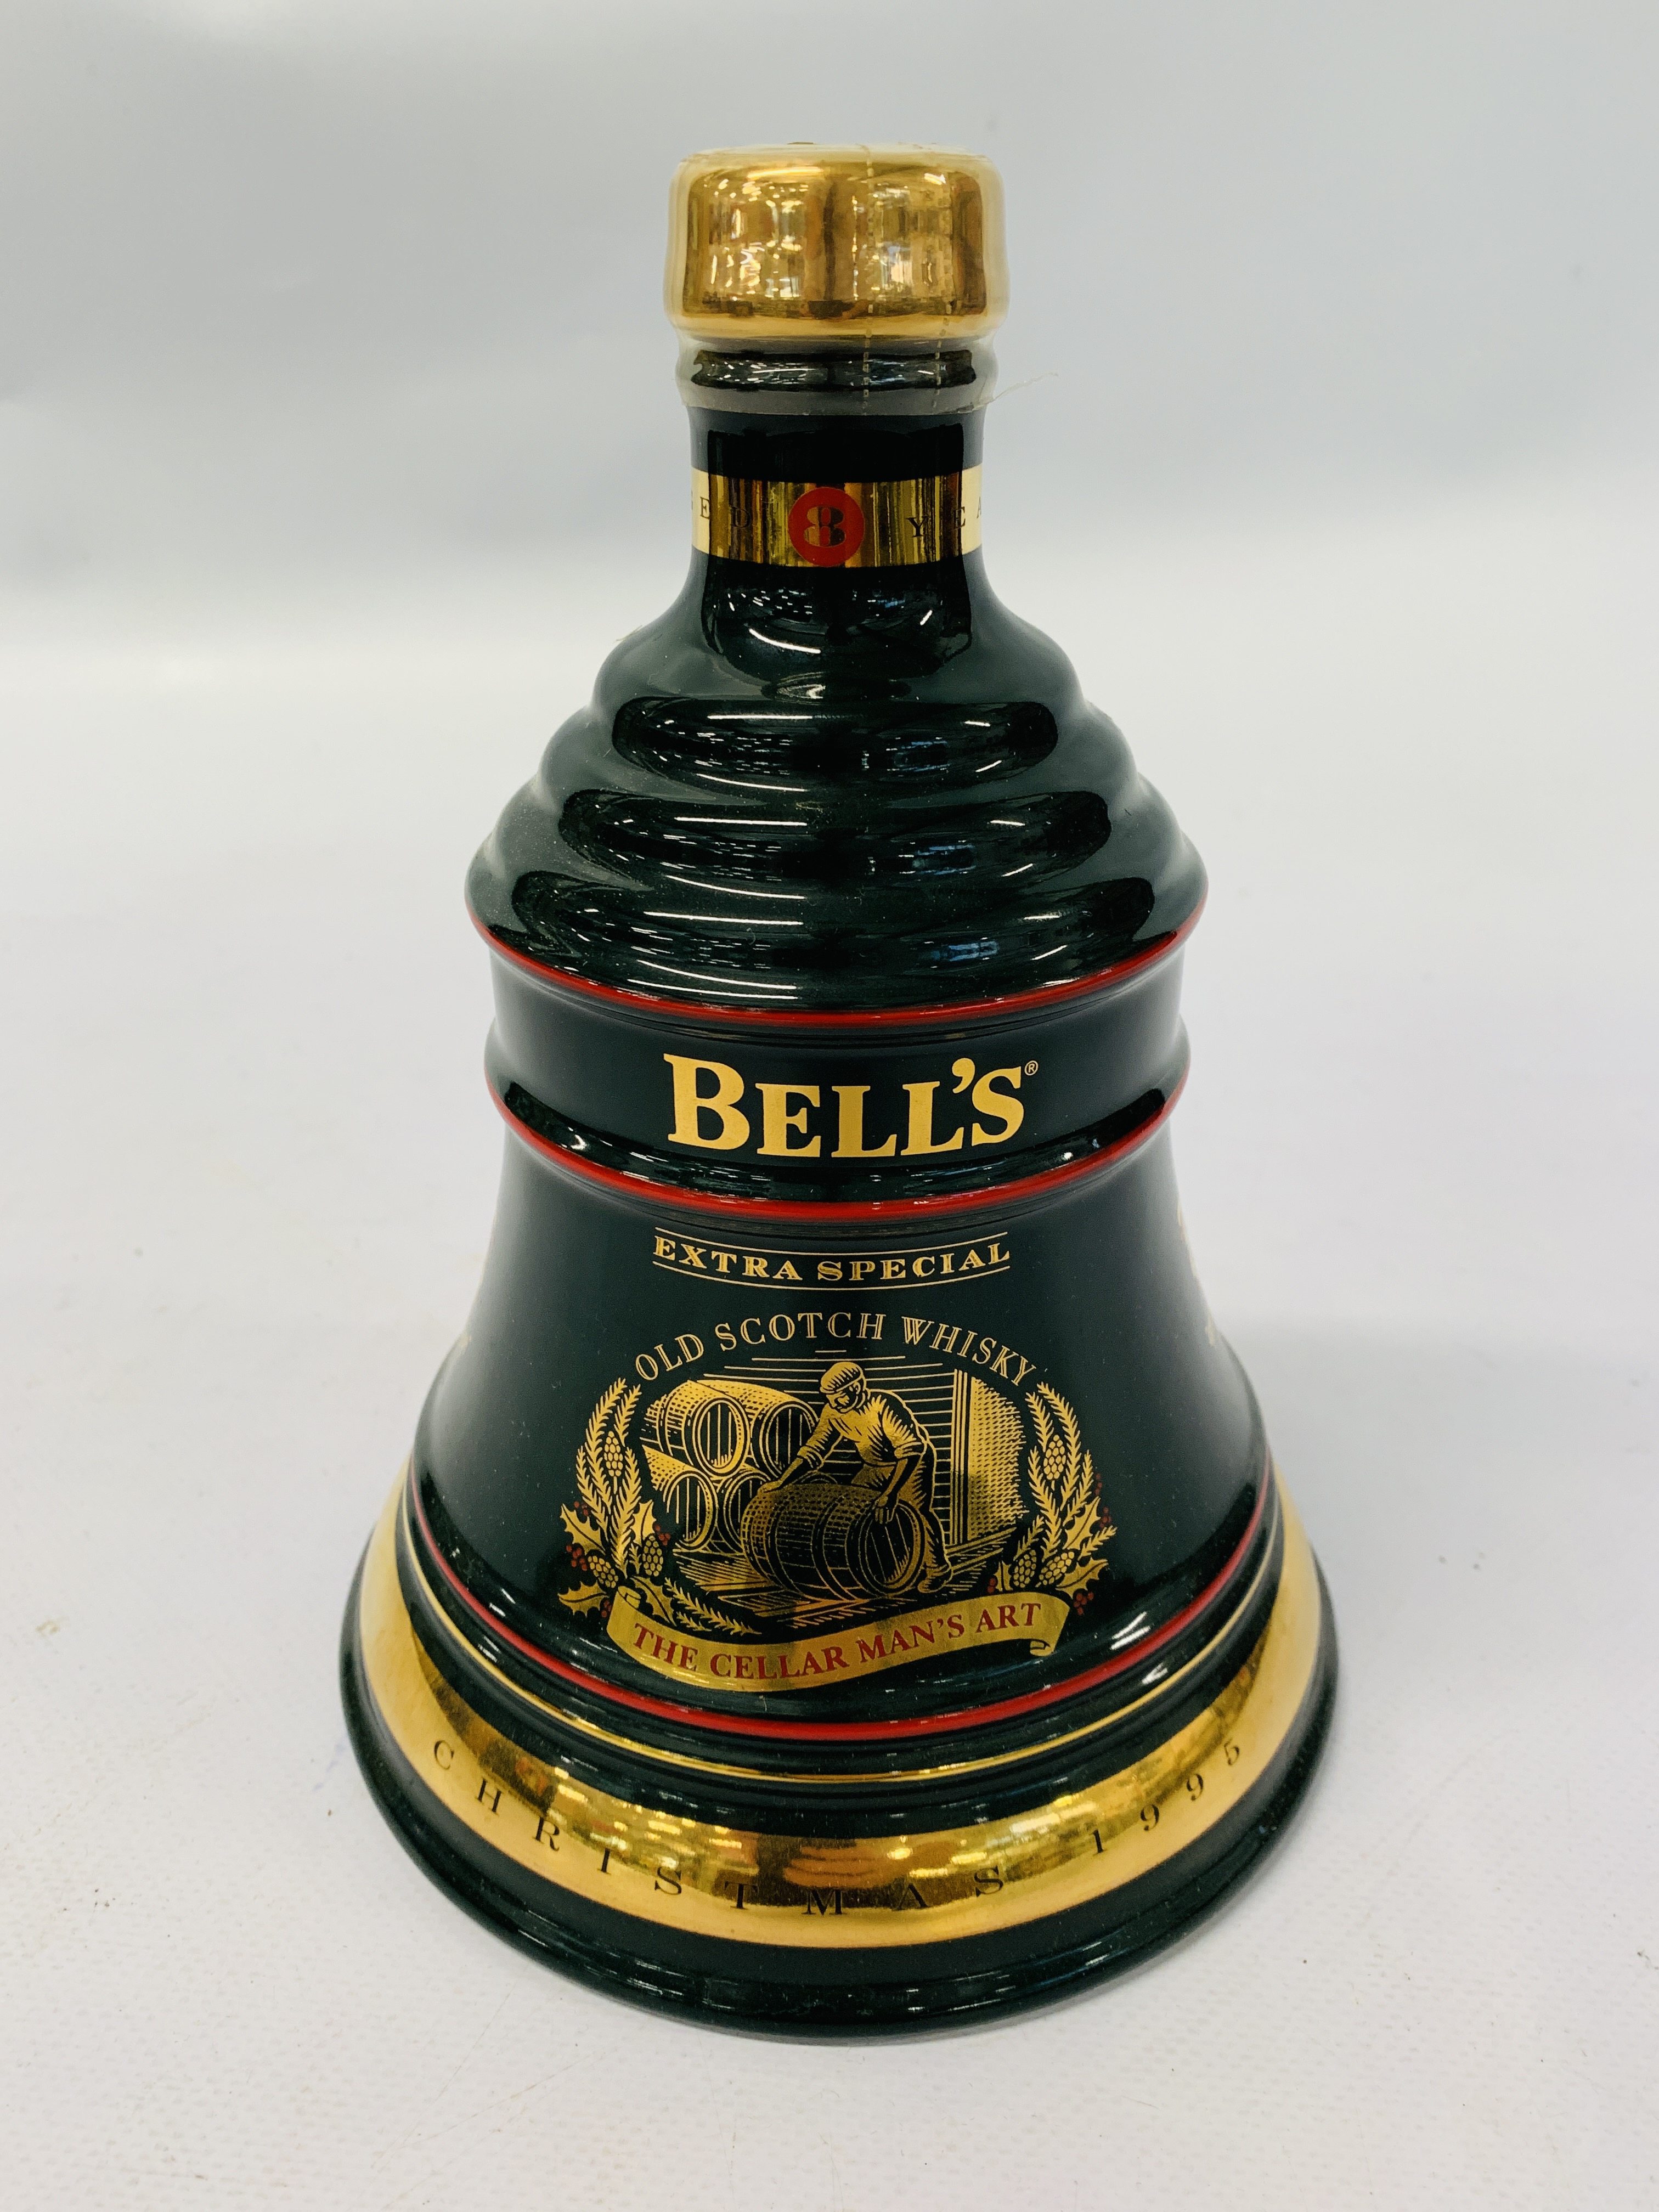 BELLS OLD SCOTCH WHISKY L EDITION CHRISTMAS 1999 DECANTER 70CL (BOXED) - Image 3 of 3